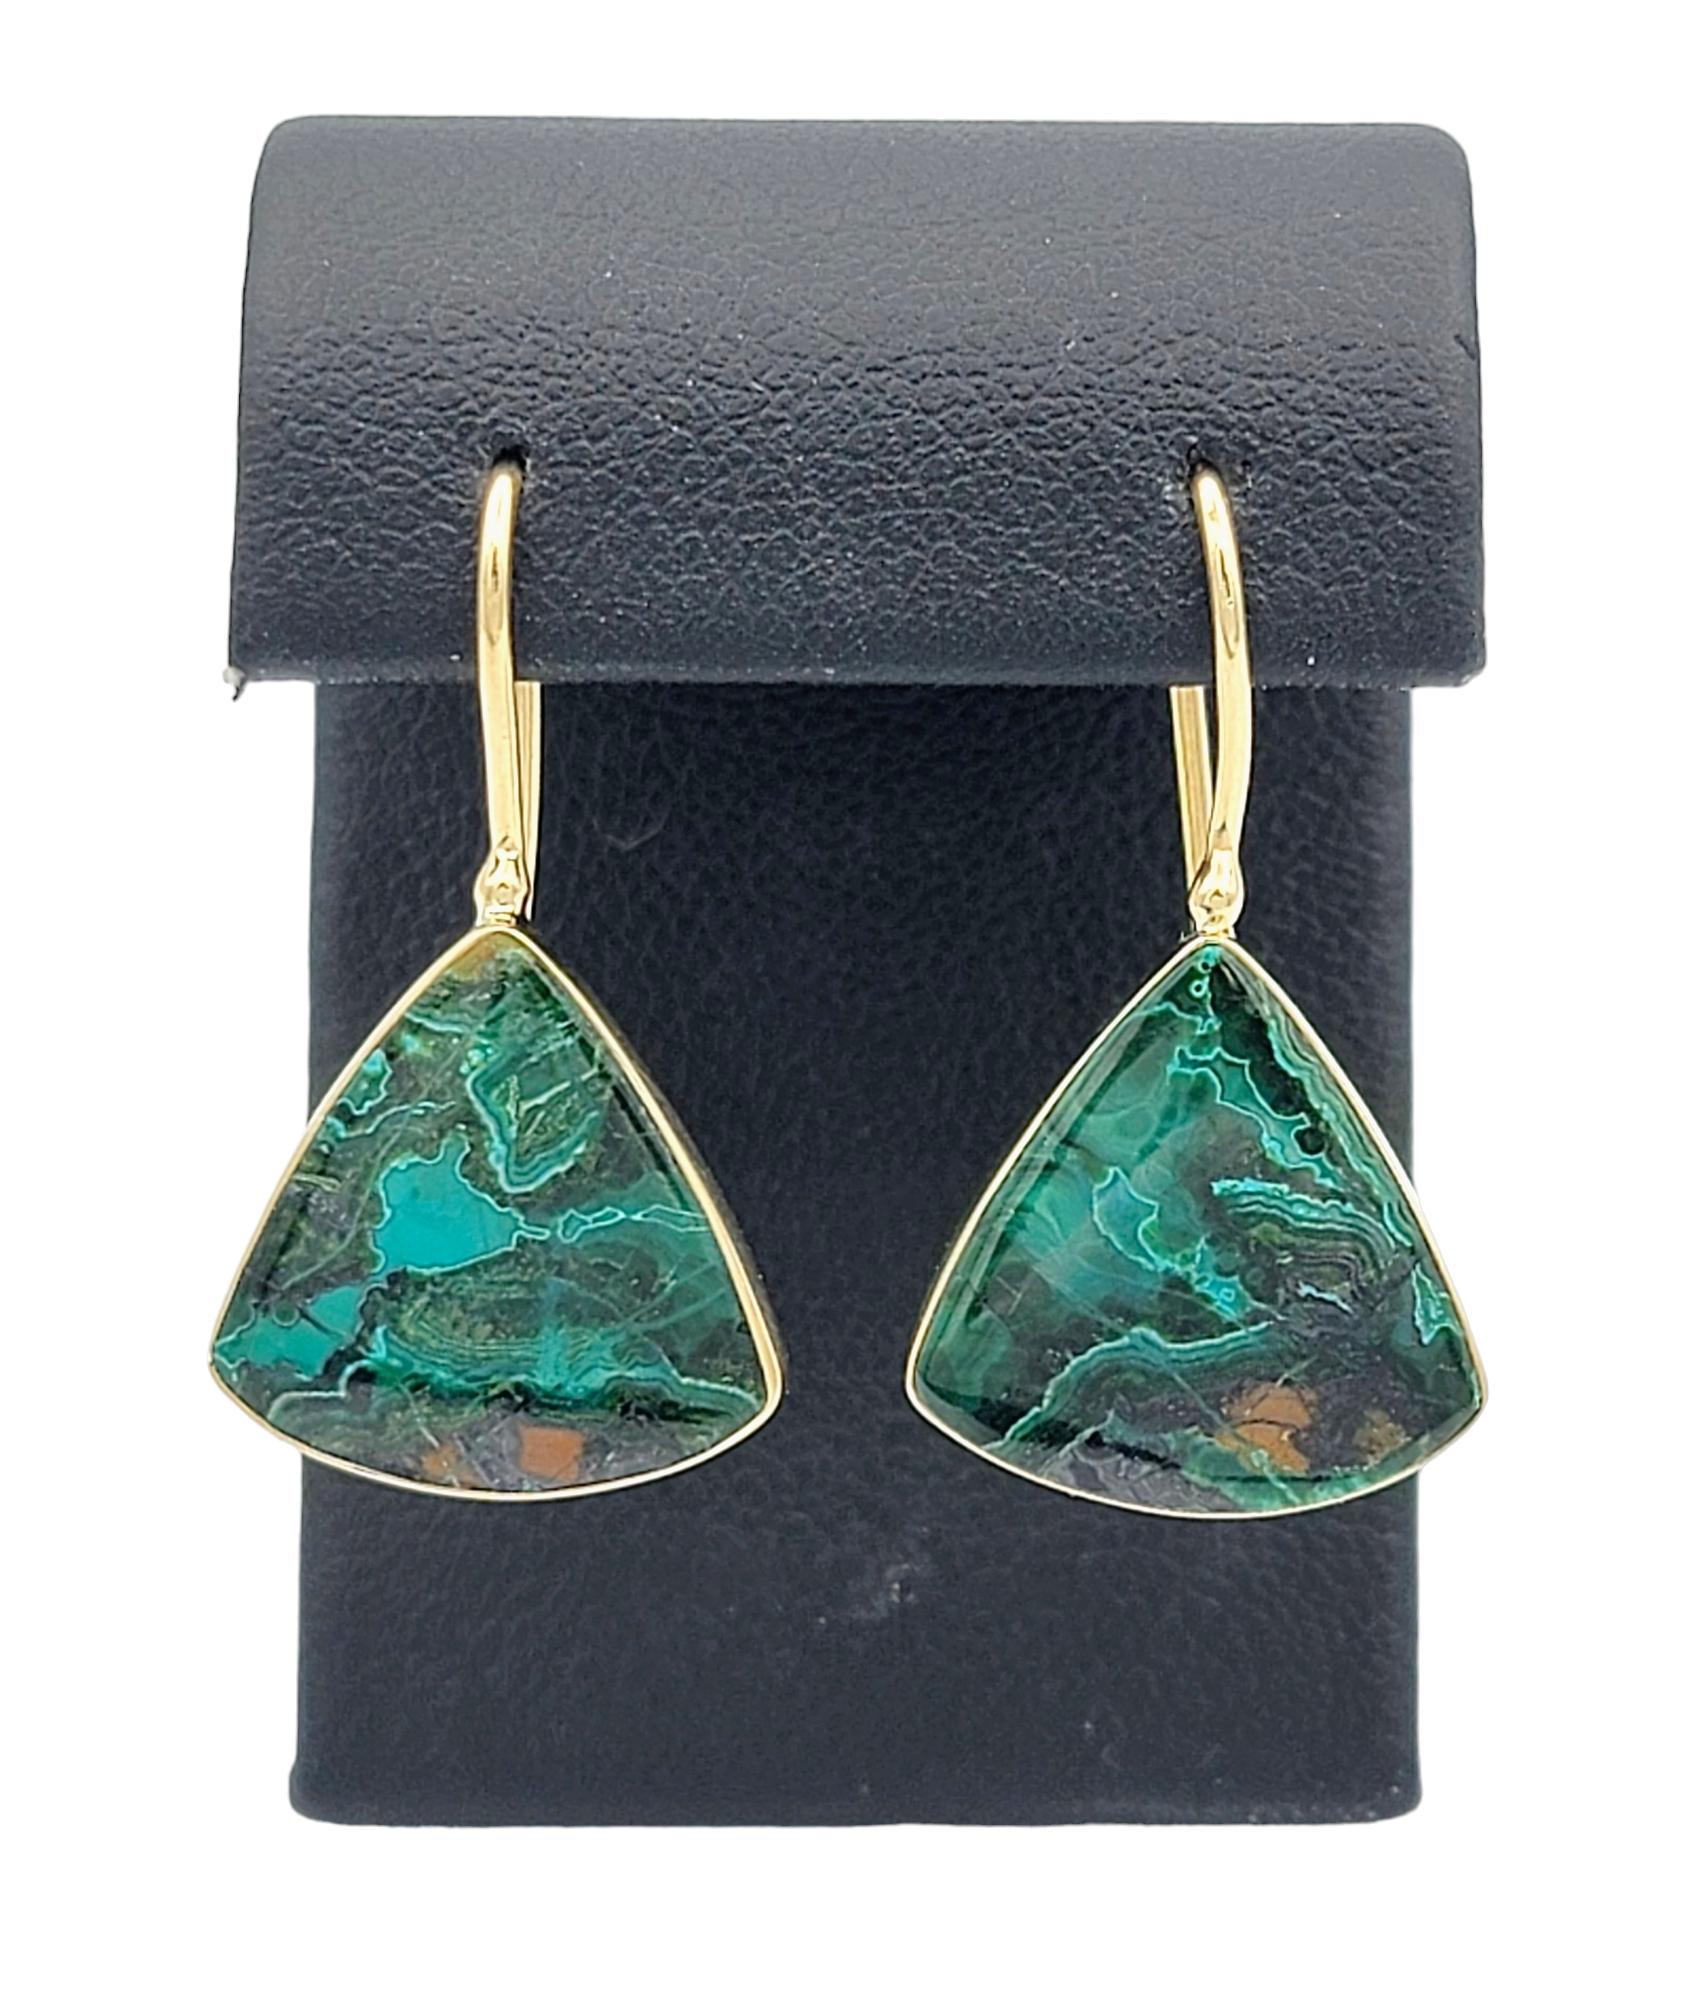 Triangular Shaped Natural Malachite Dangle Earrings in 14 Karat Yellow Gold In Good Condition For Sale In Scottsdale, AZ